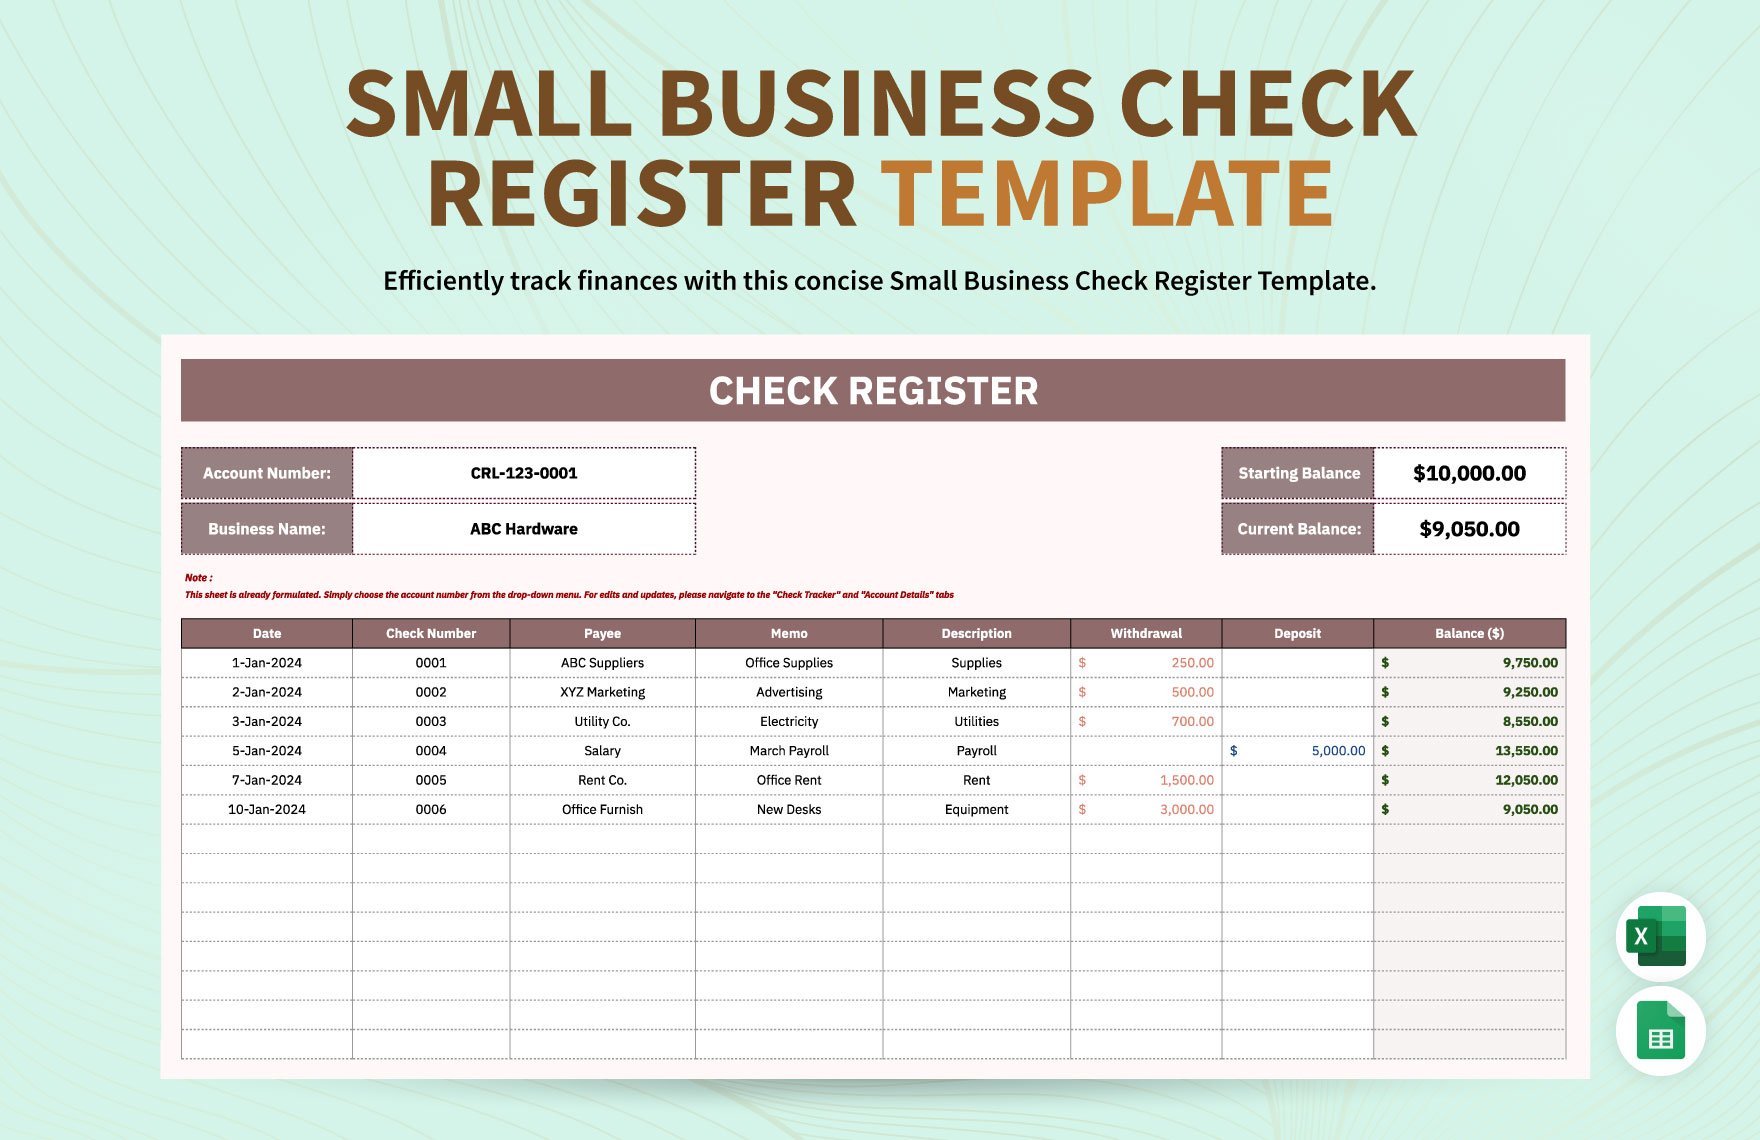 Small Business Check Register Template in Excel, Google Sheets